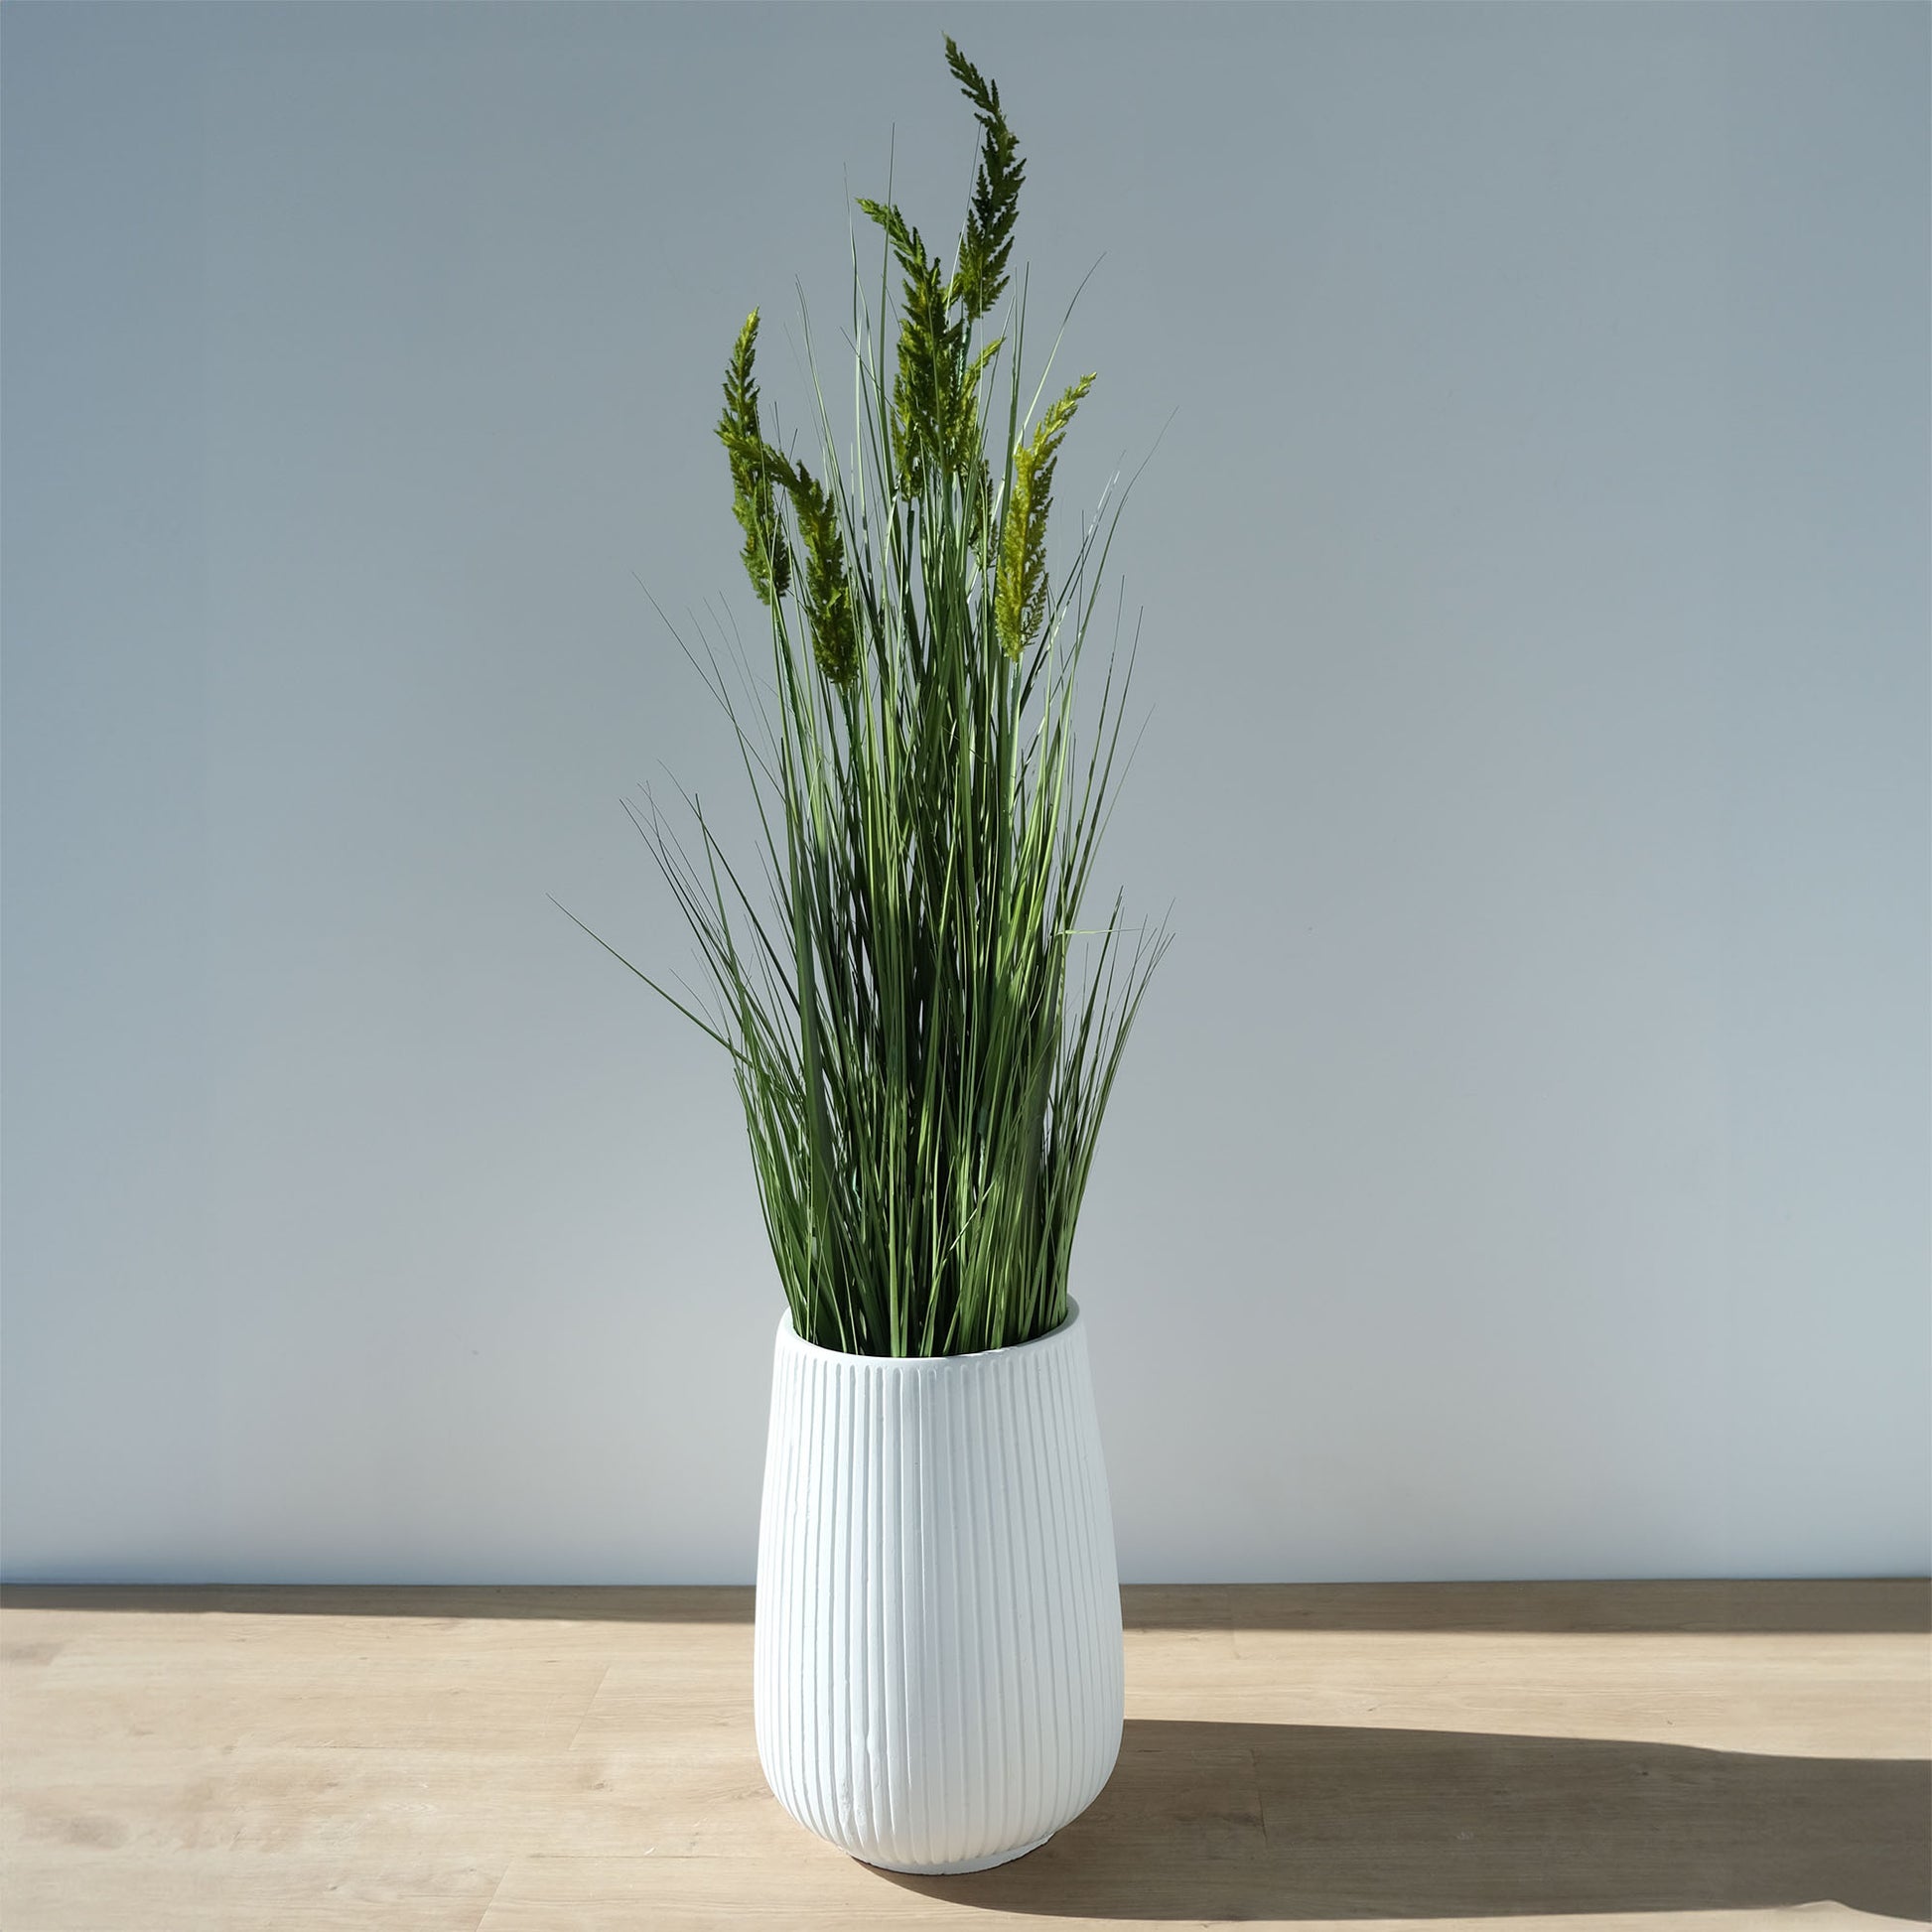 tall grass in a white planter